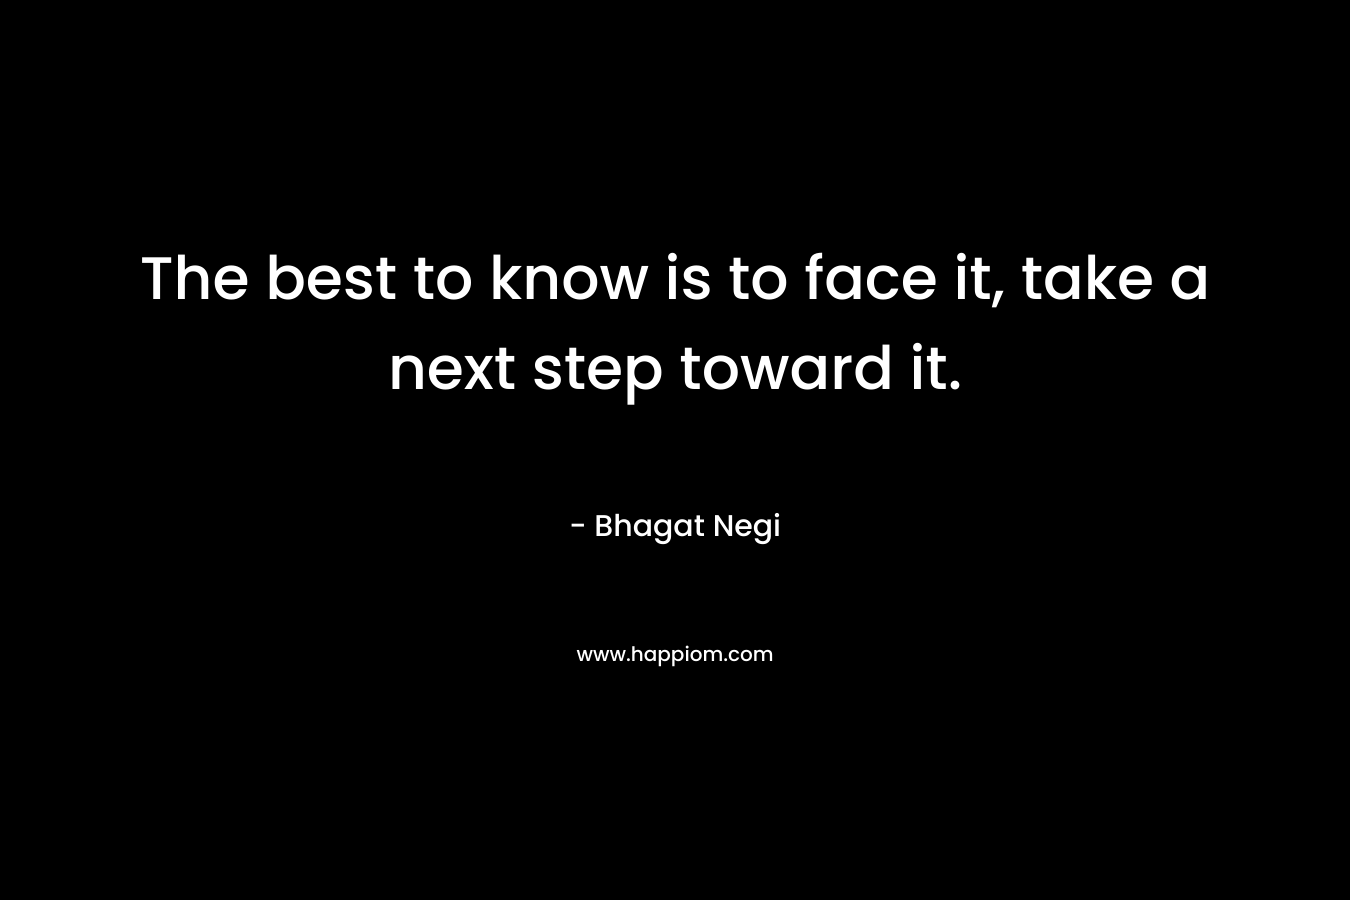 The best to know is to face it, take a next step toward it. – Bhagat Negi